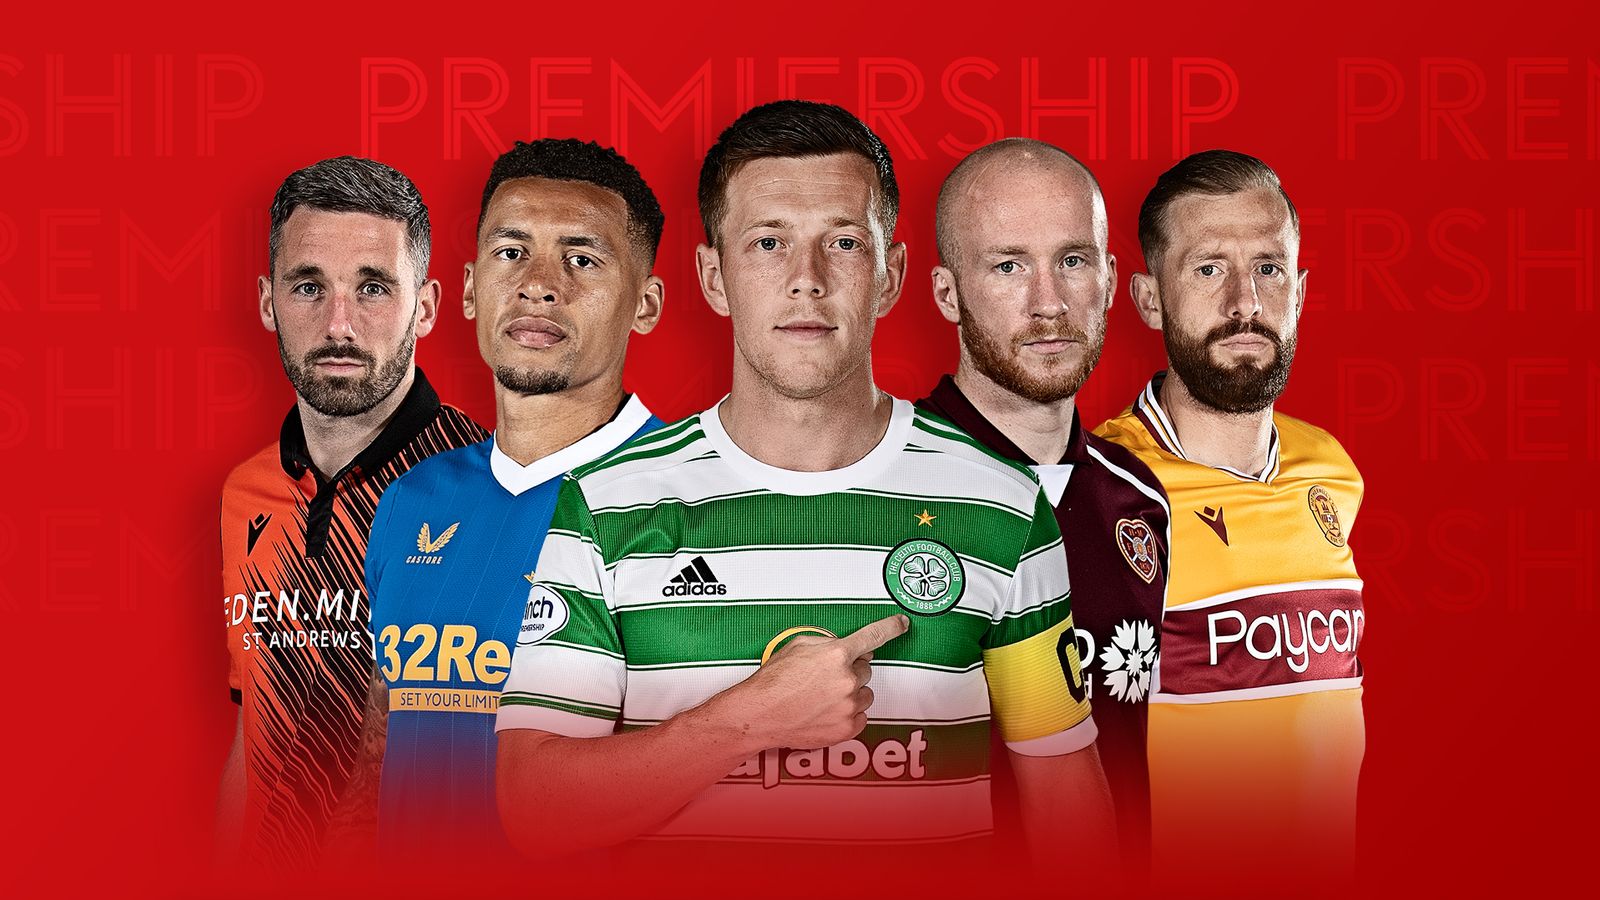 Scottish Premiership 2022/23 fixtures, dates and schedule: Celtic start title defence at home to Aberdeen